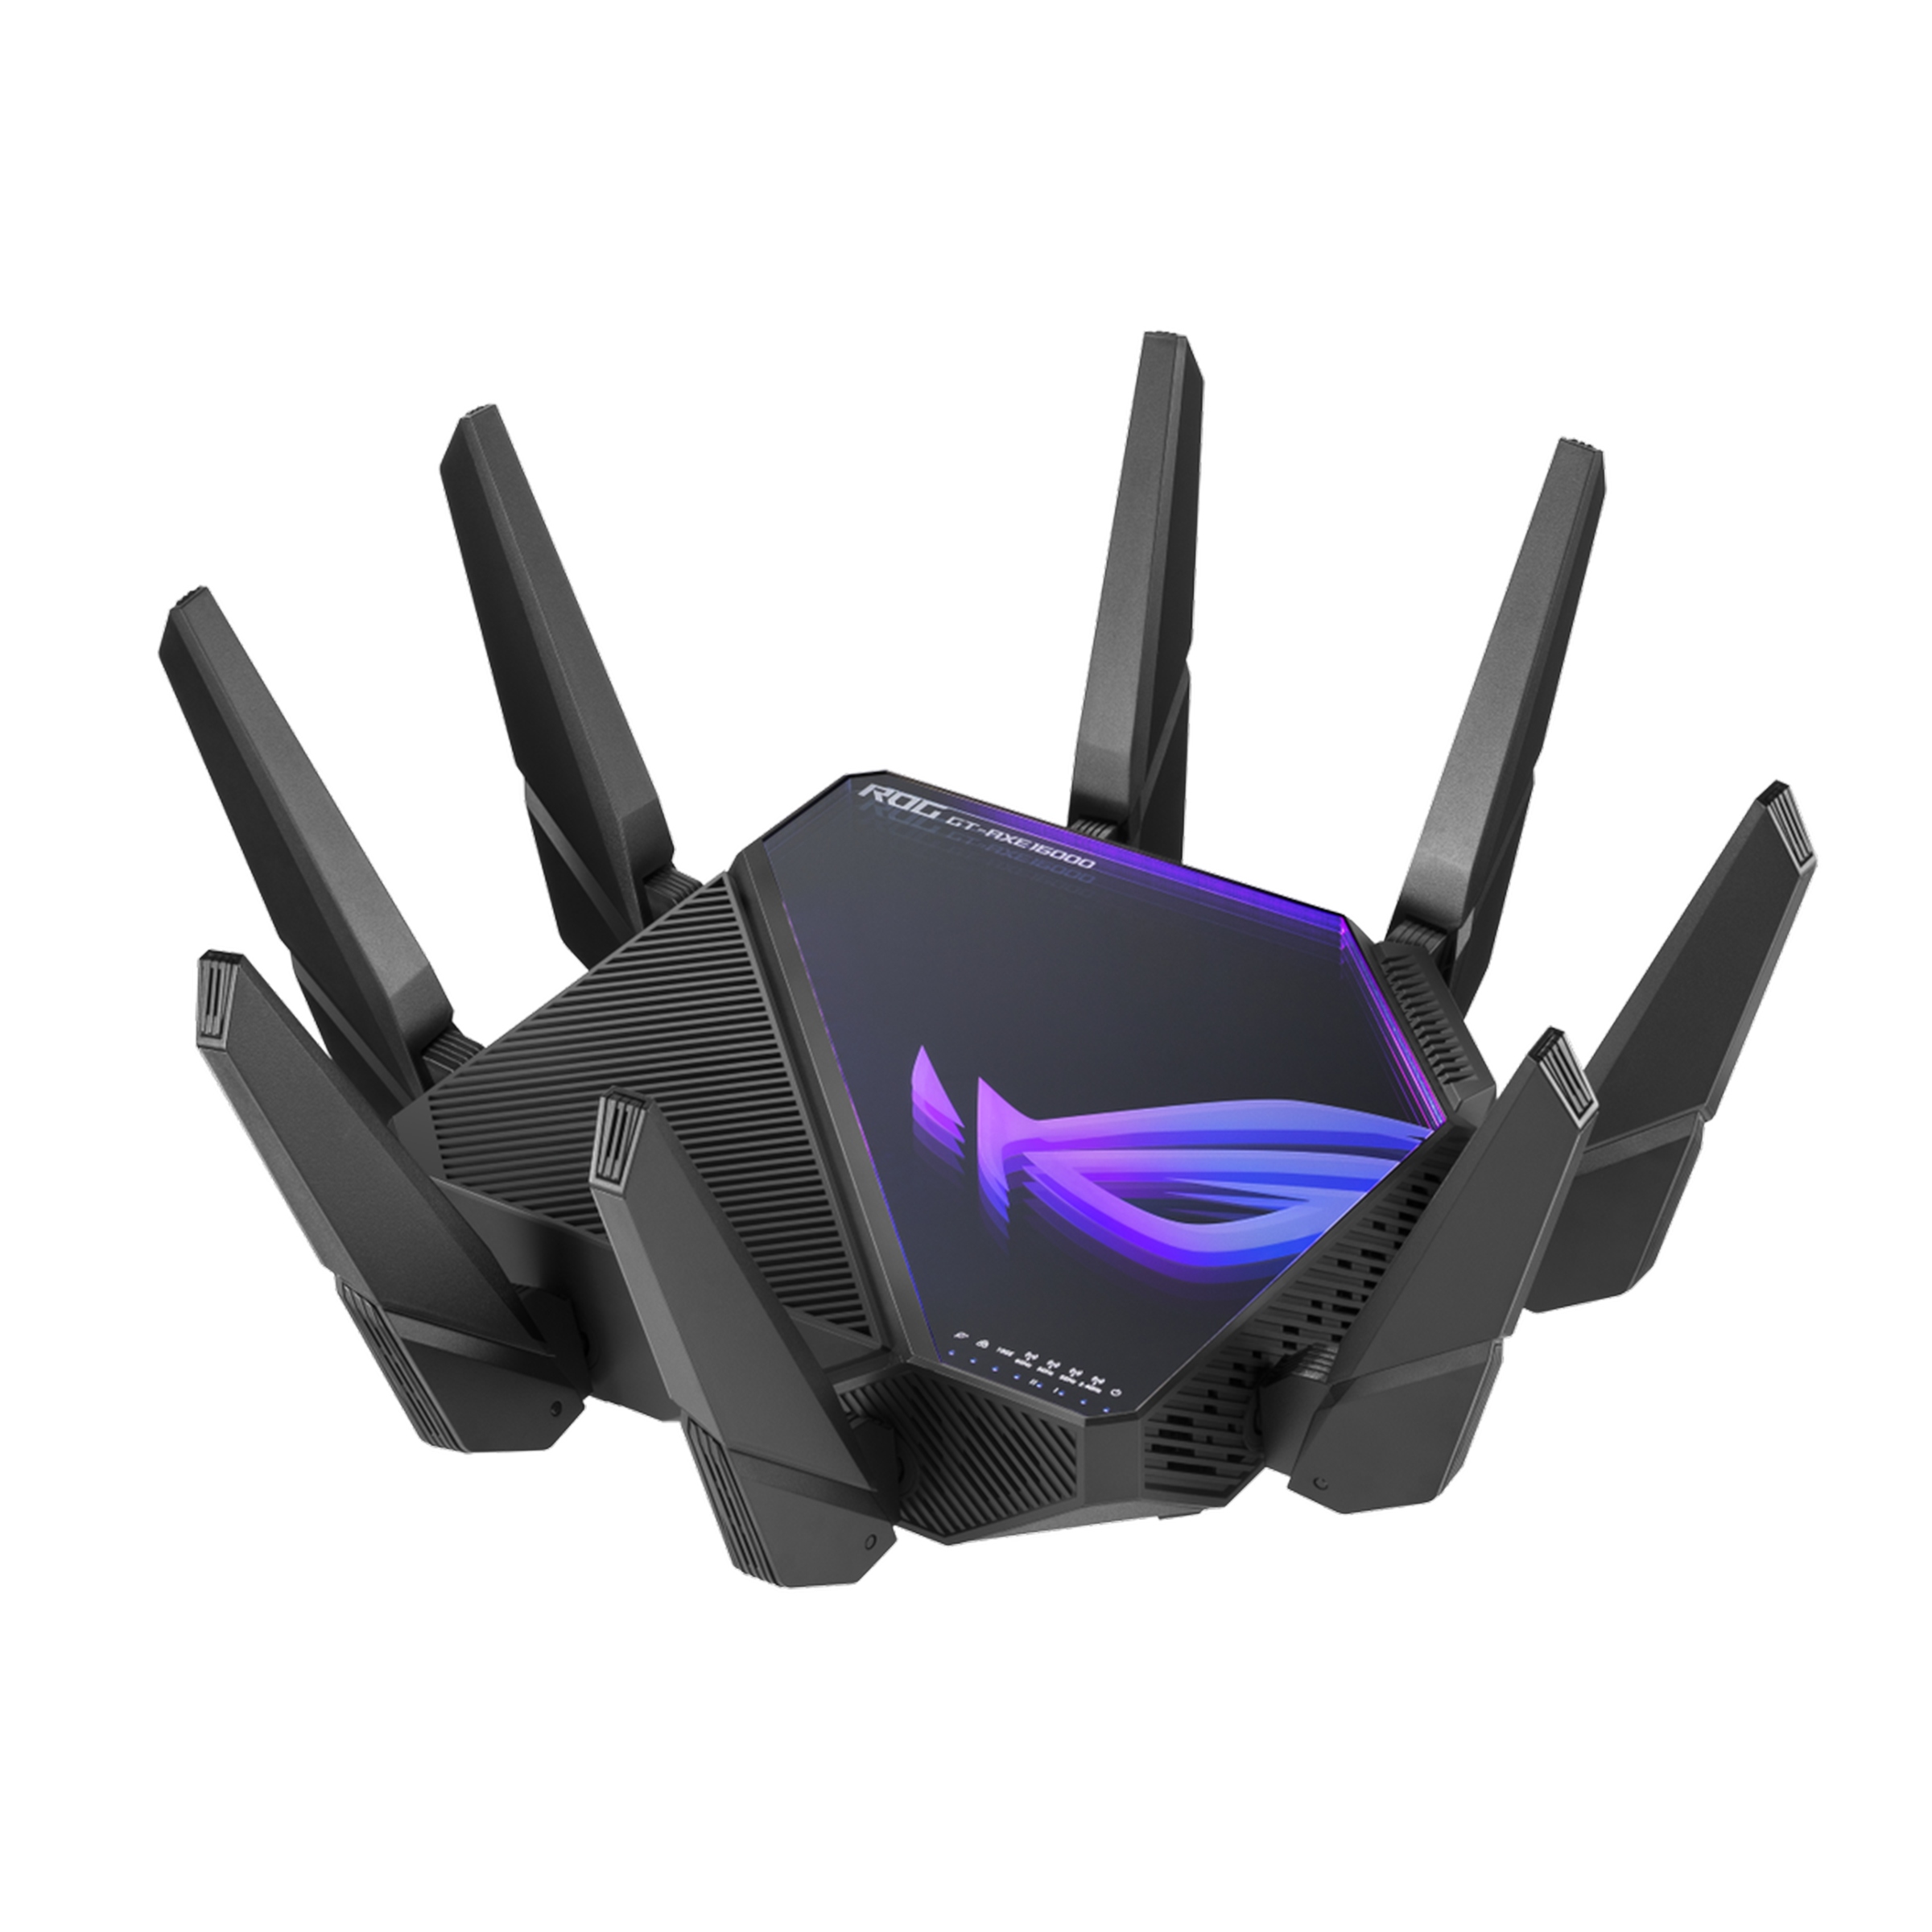 TP-Link AXE16000 Quad-Band WiFi 6E Router (Archer AXE300) - Dual 10Gb Ports  Wireless Internet Router, Gaming Router, Supports VPN Client, 2.5G WAN/LAN